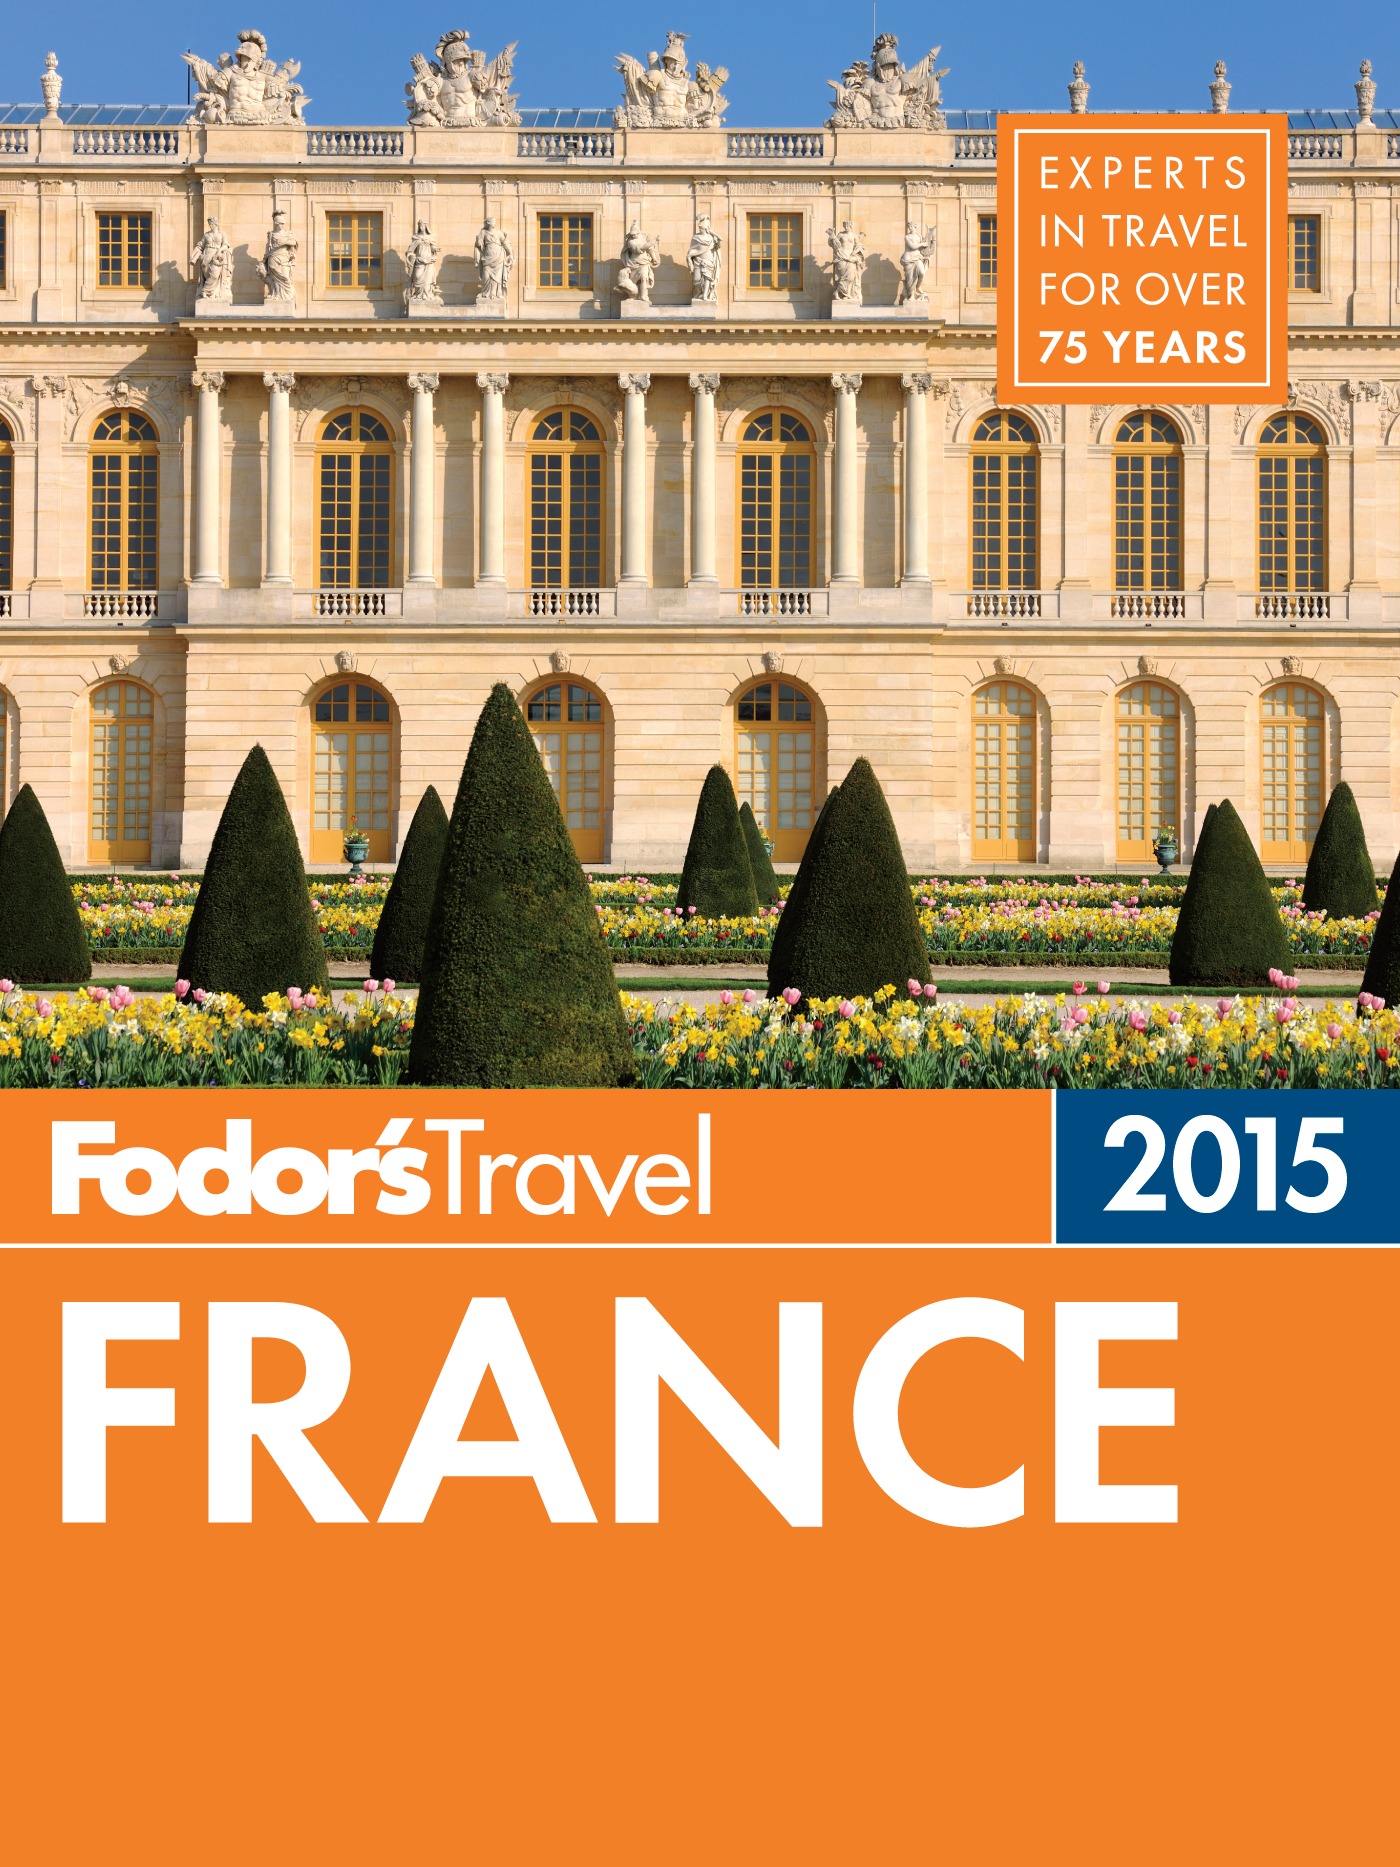 Fodor's France 2015 cover image